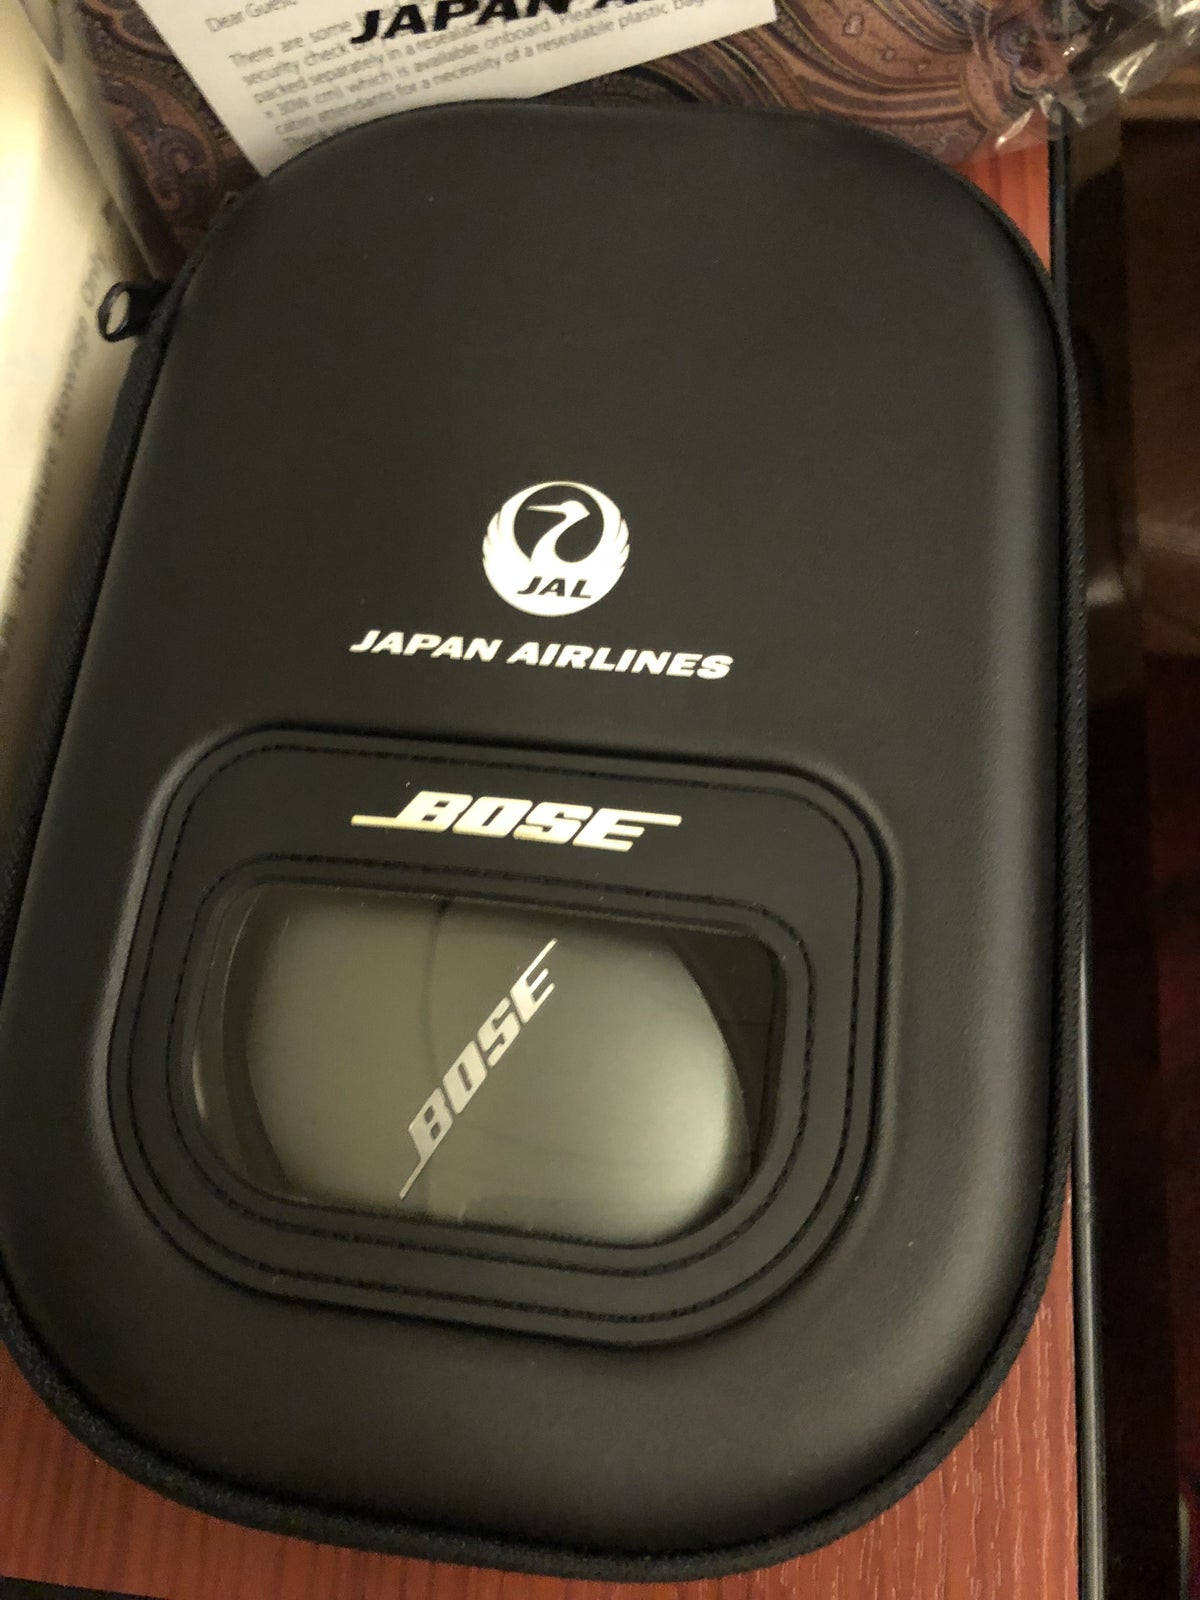 Japan Airlines 777 First Class Bose Noise-Cancelling Headphones